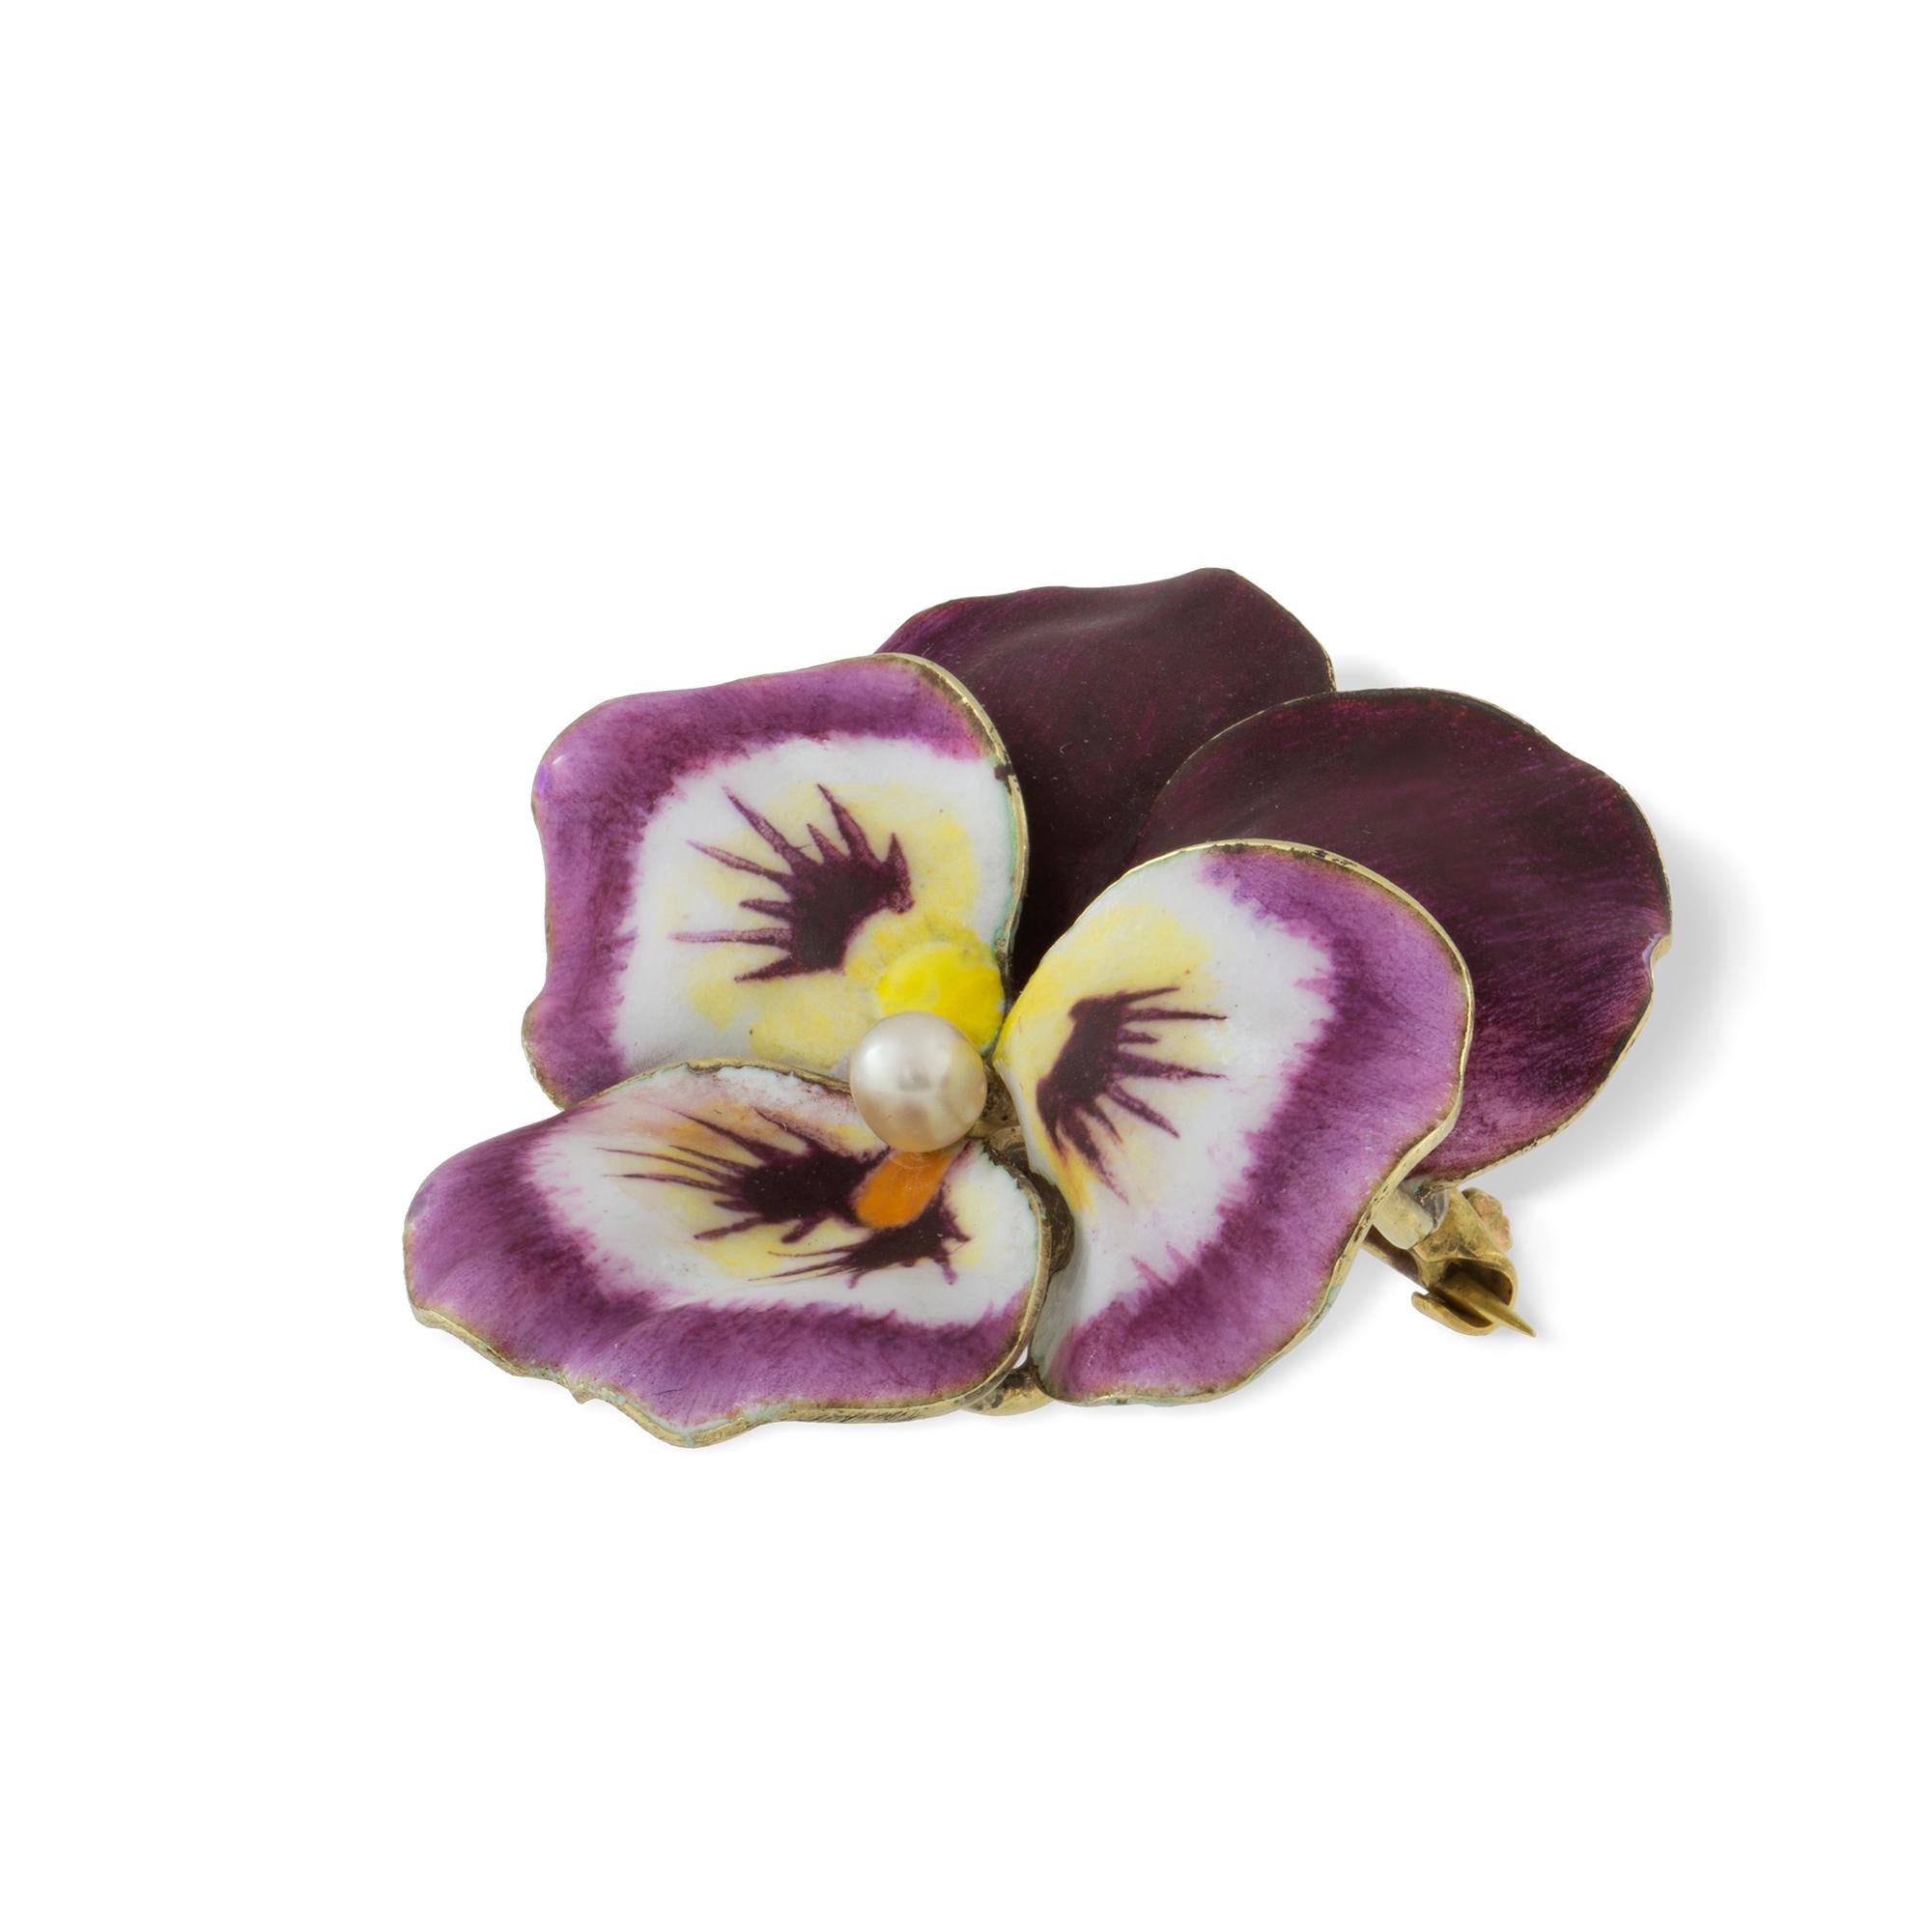 An antique enamel and pearl pansy brooch, the round pearl measuring approximately 3mm set to the centre of five realistically carved and enamelled petals with a yellow gold back with brooch fittings,  circa 1900, made by A.J Hedges & Co in the USA,